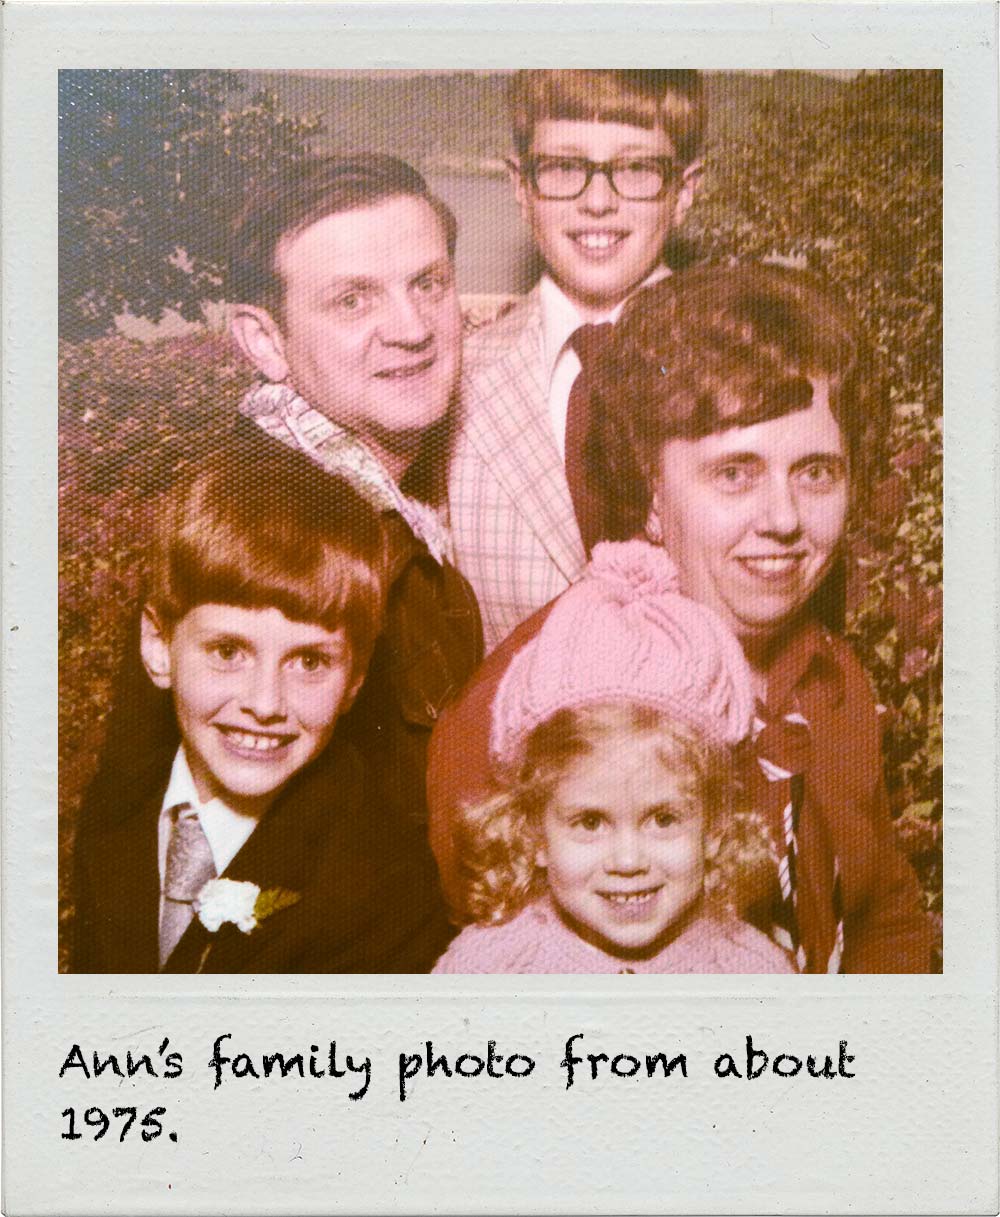 Ann’s family photo from about 1975.